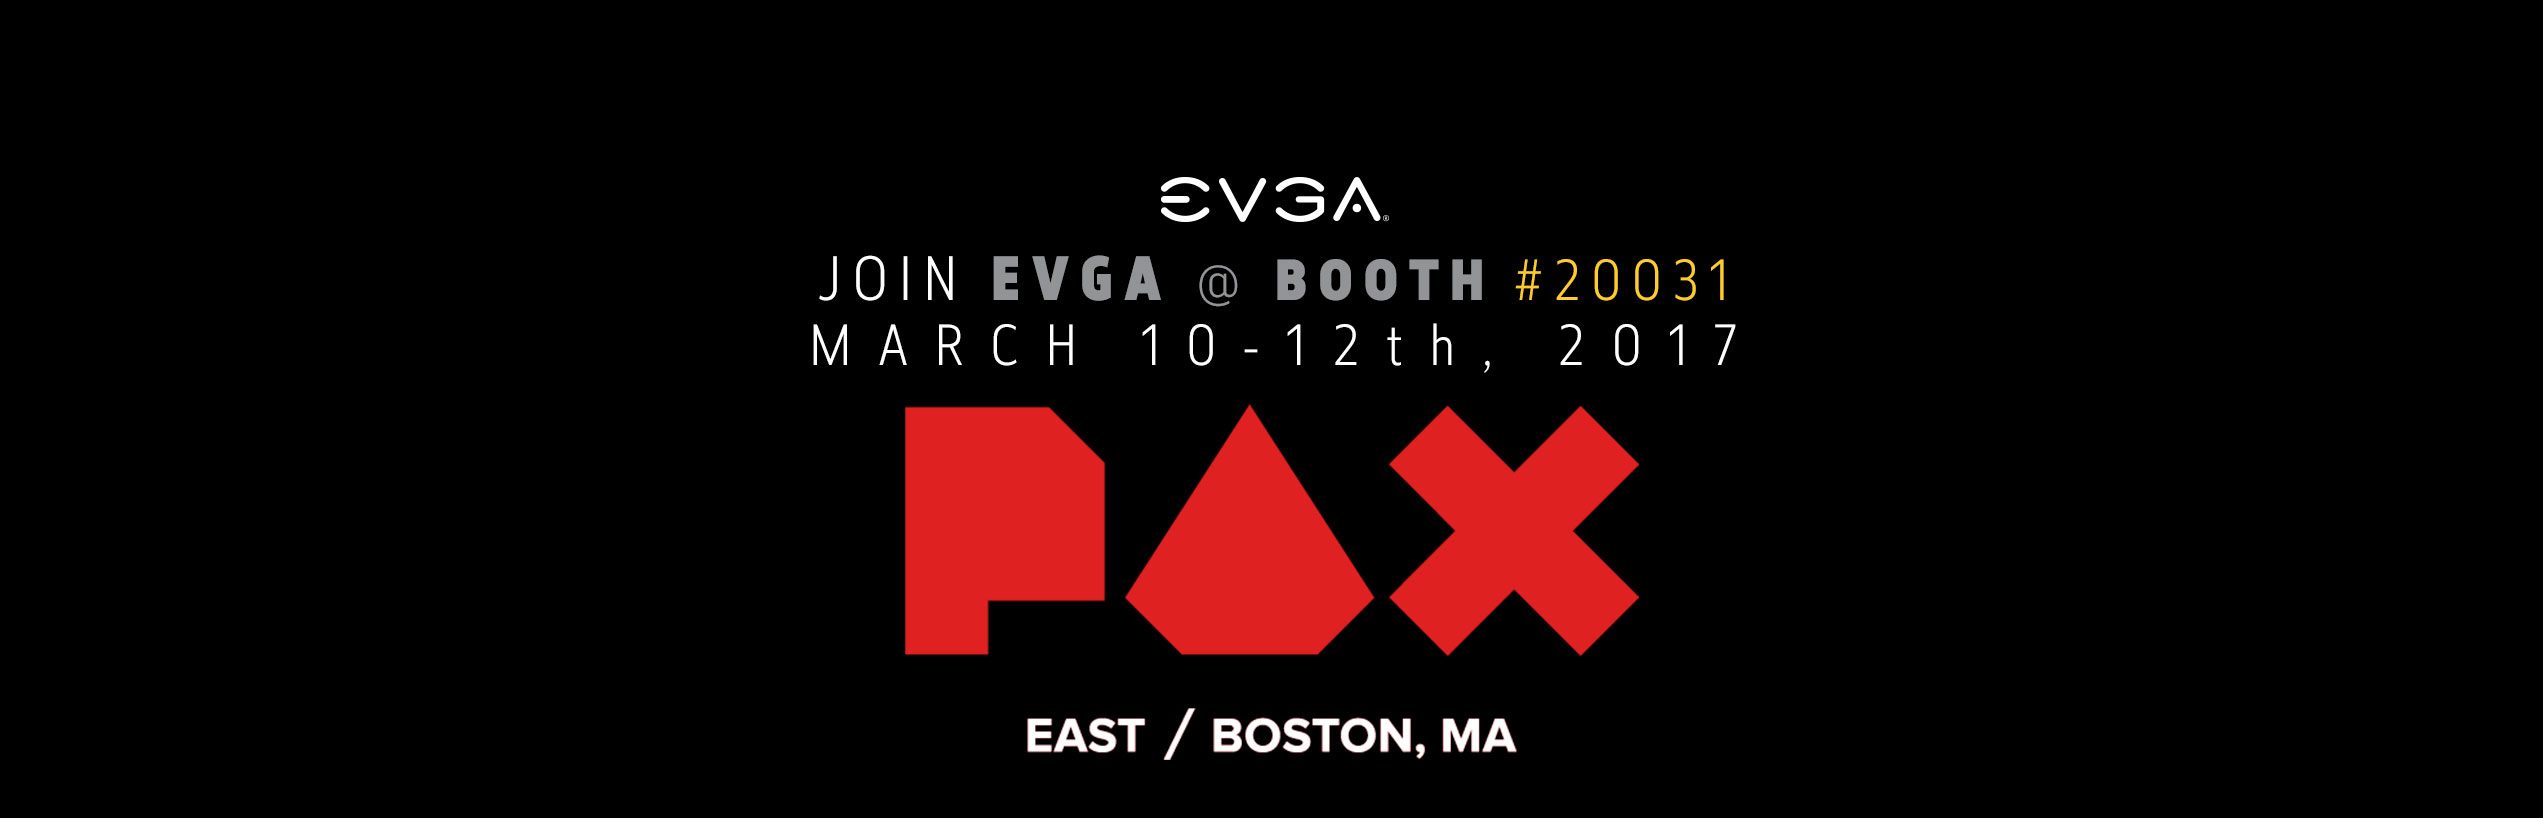 EVGA LIVE at PAX East 2017